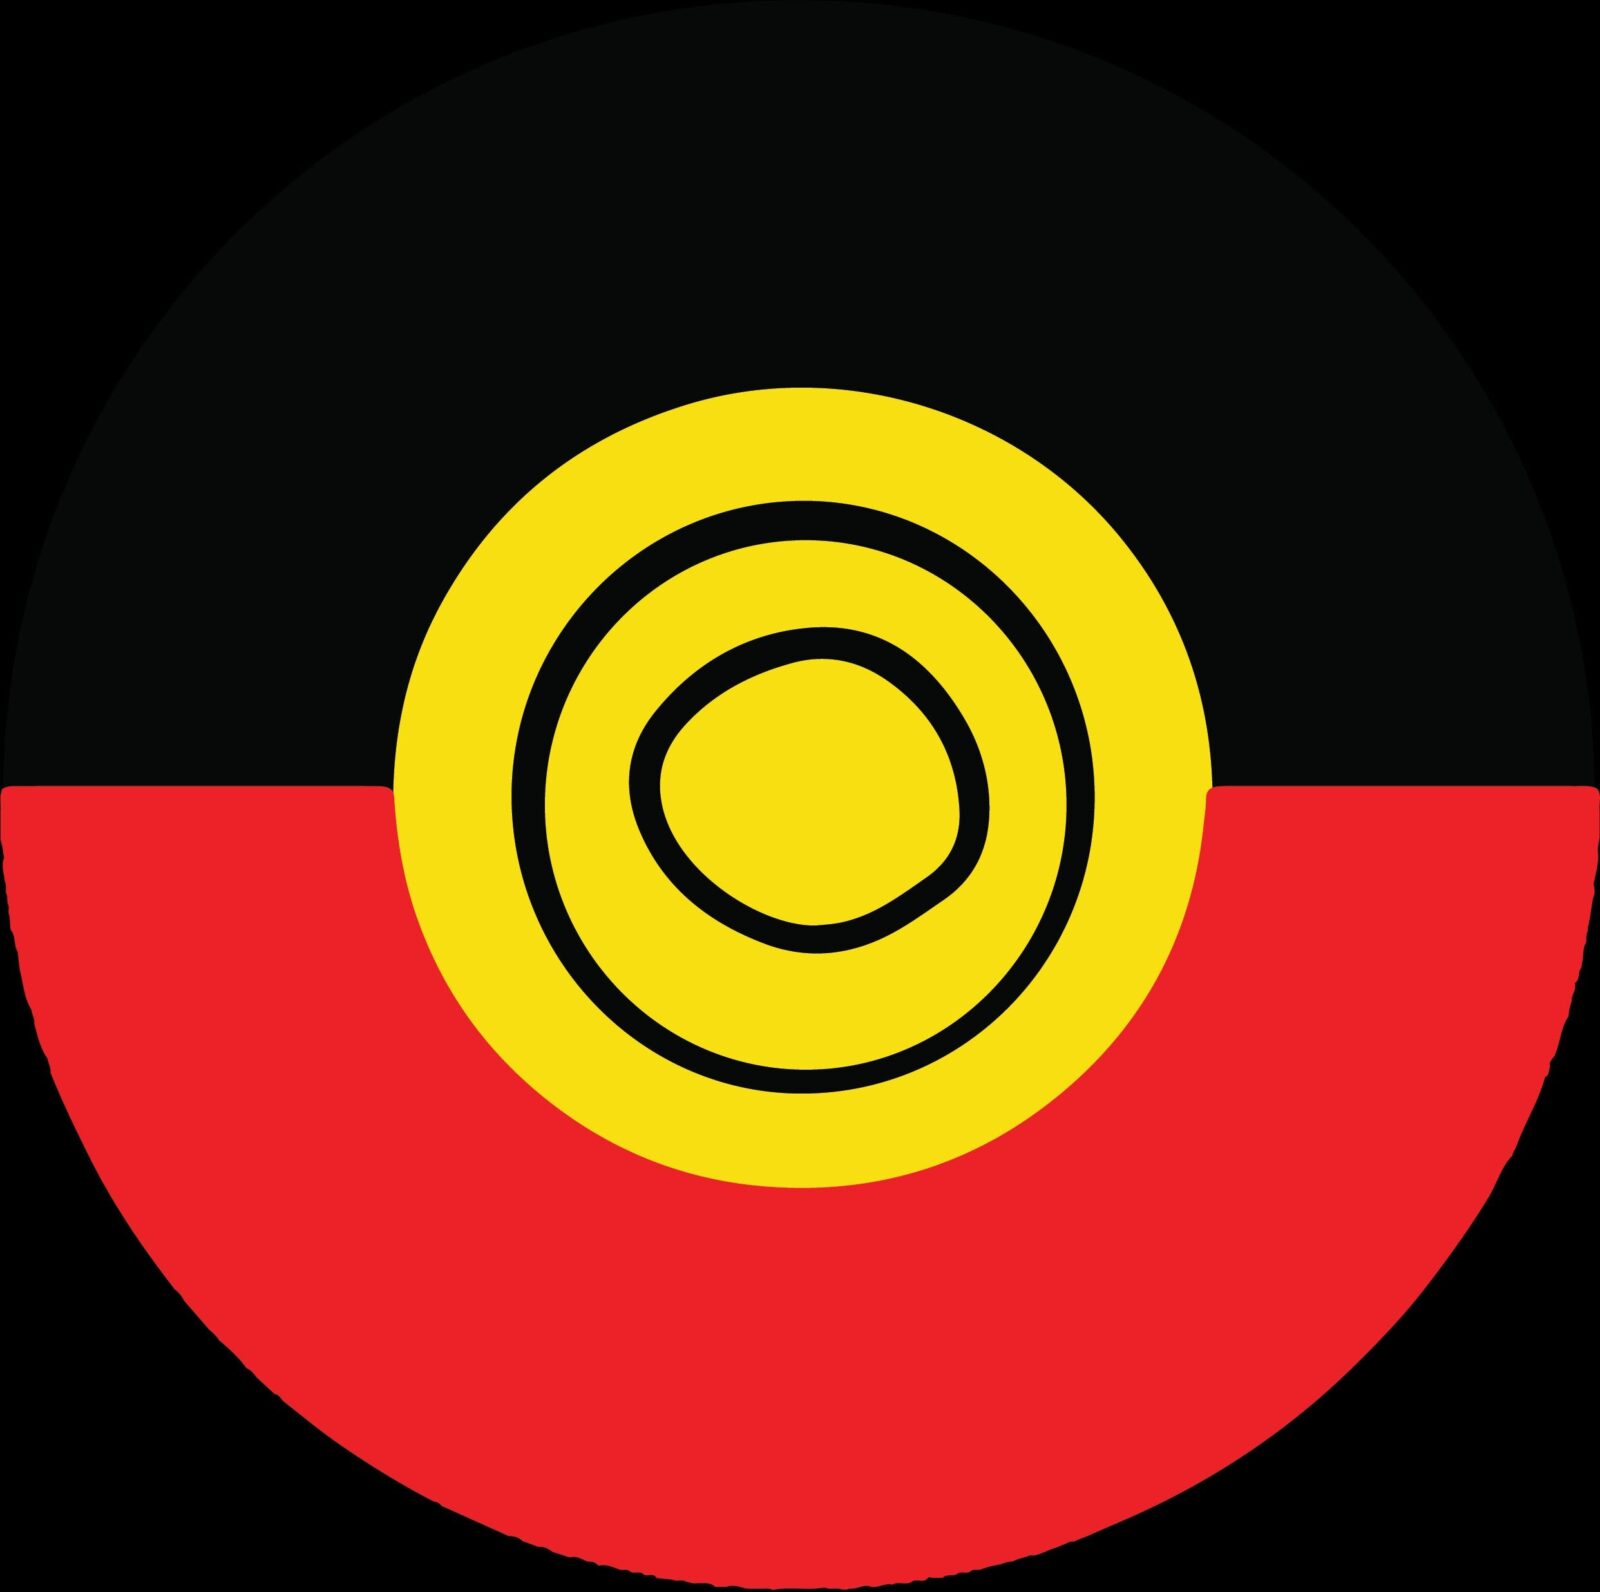 A circle logo with the top half in black, the bottom half in red and a yellow circle in the centre